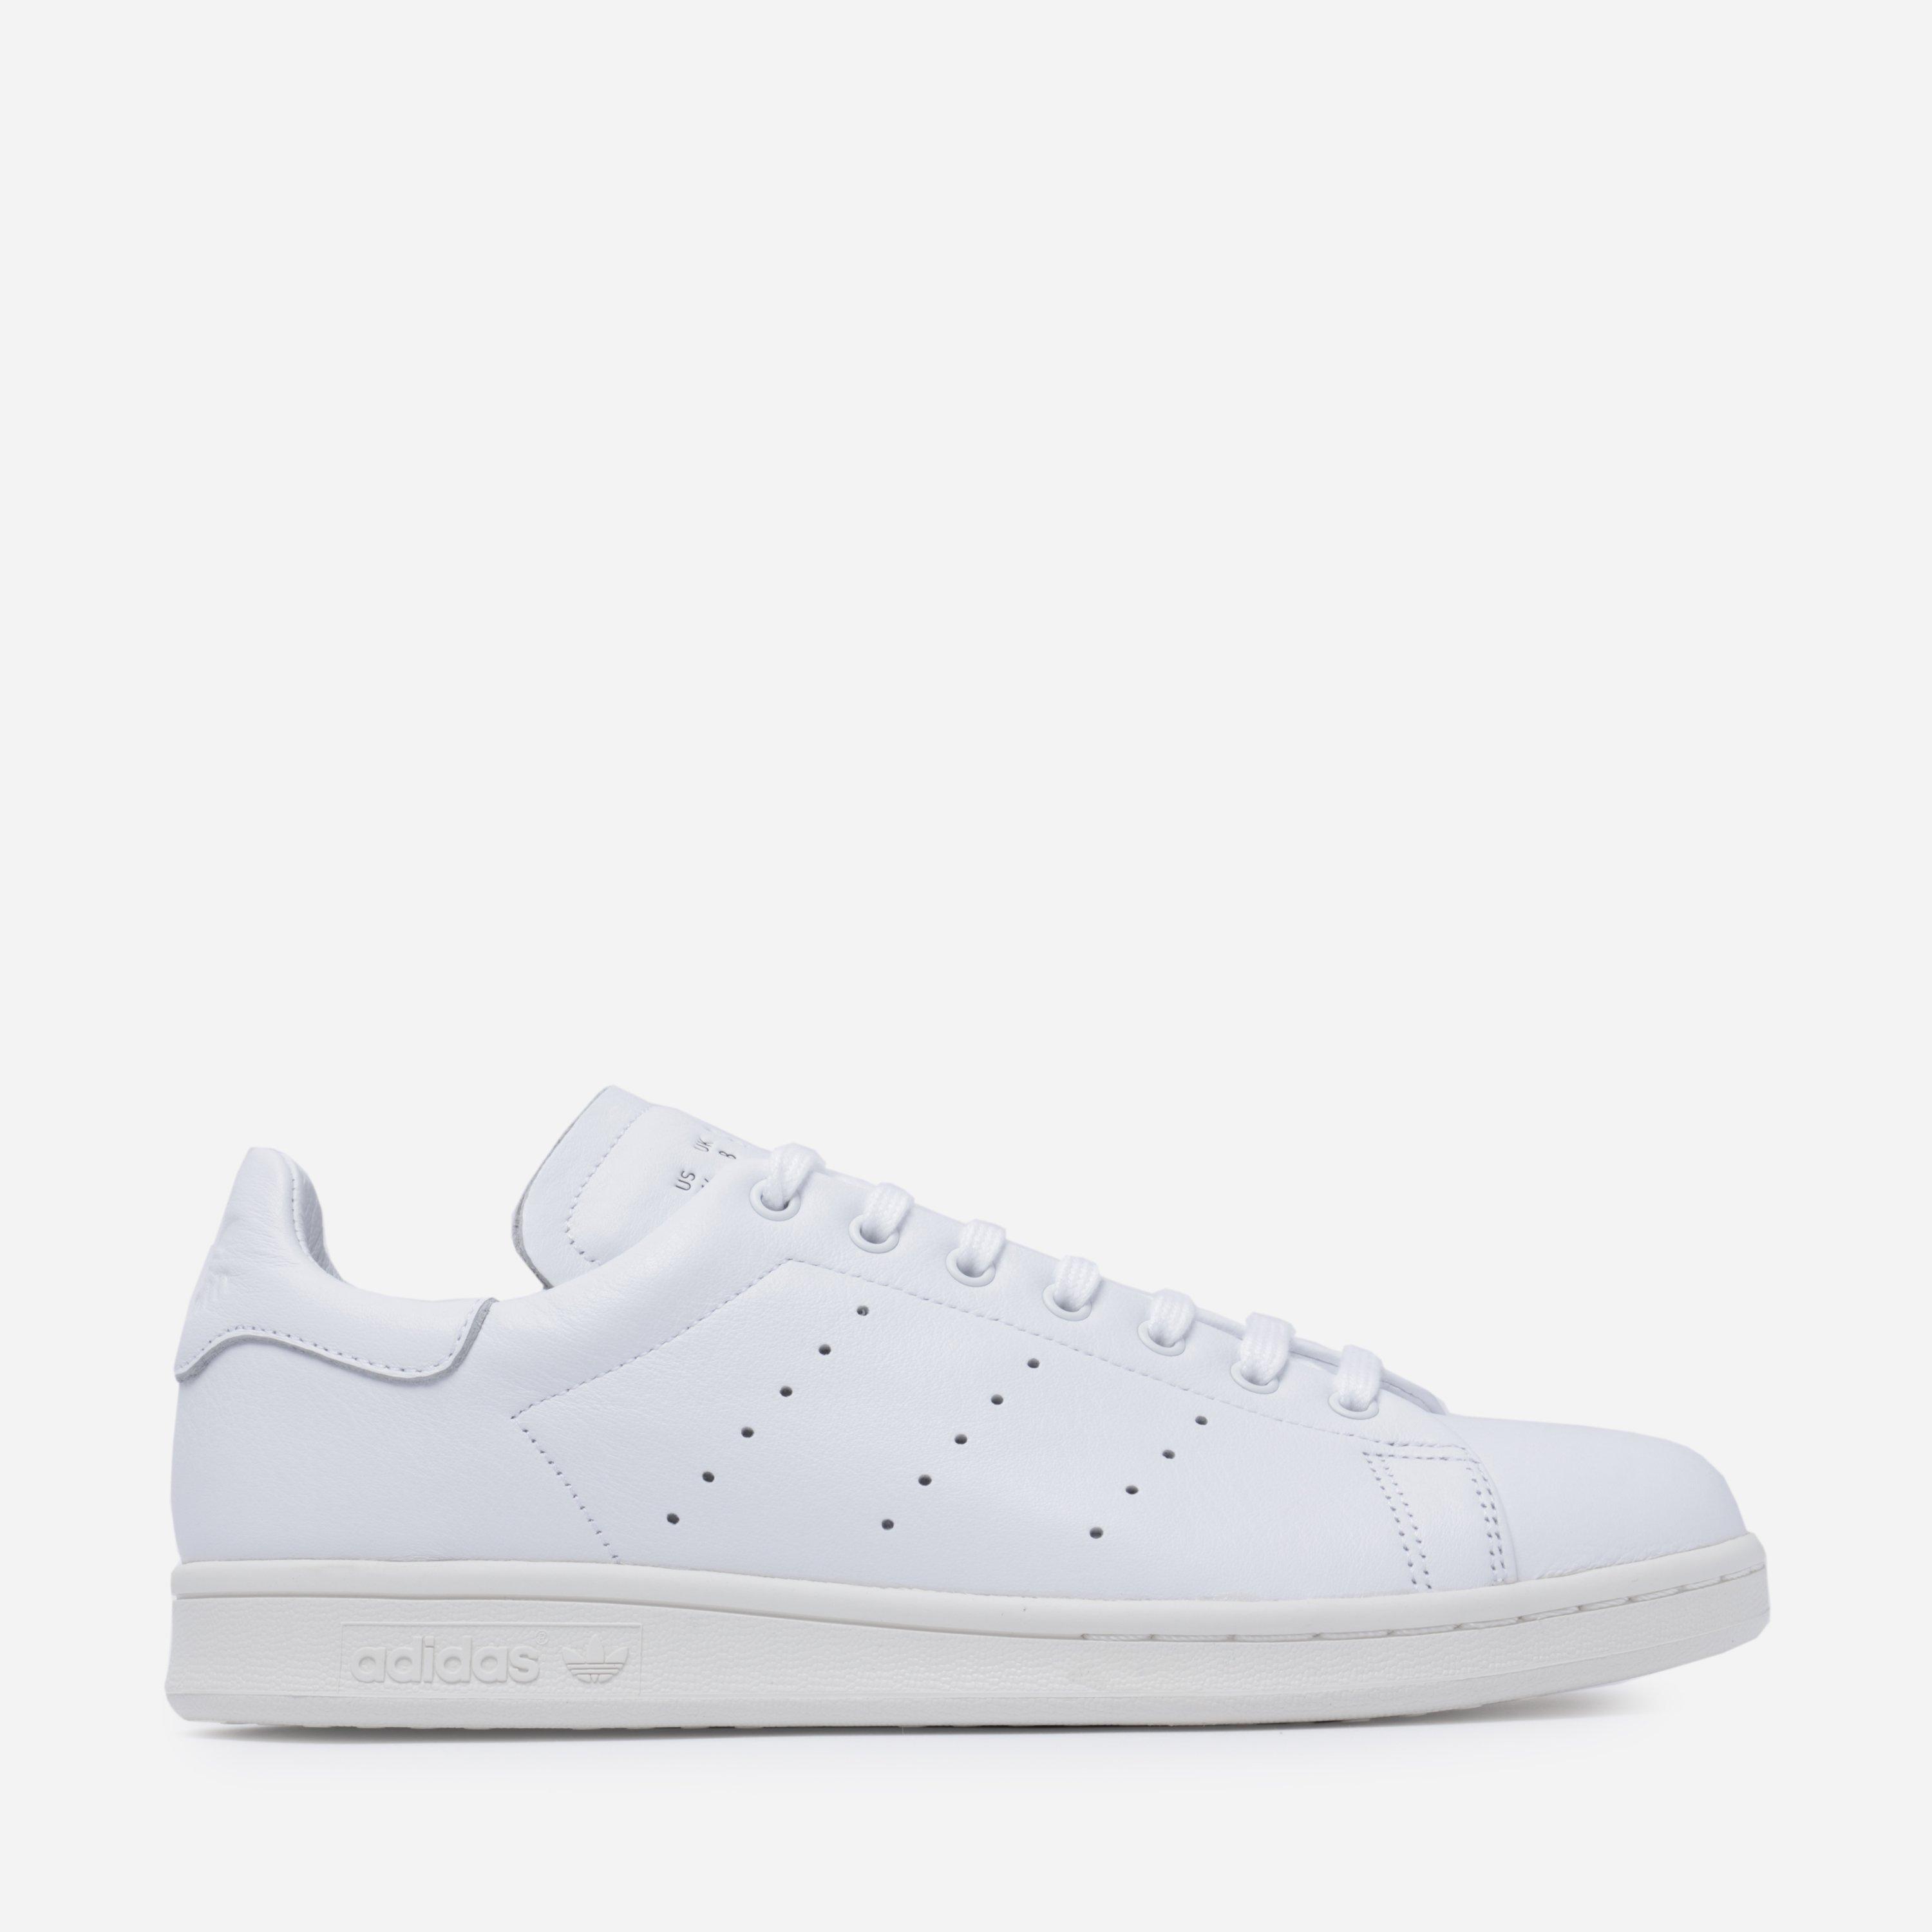 stan smith shoes white and black